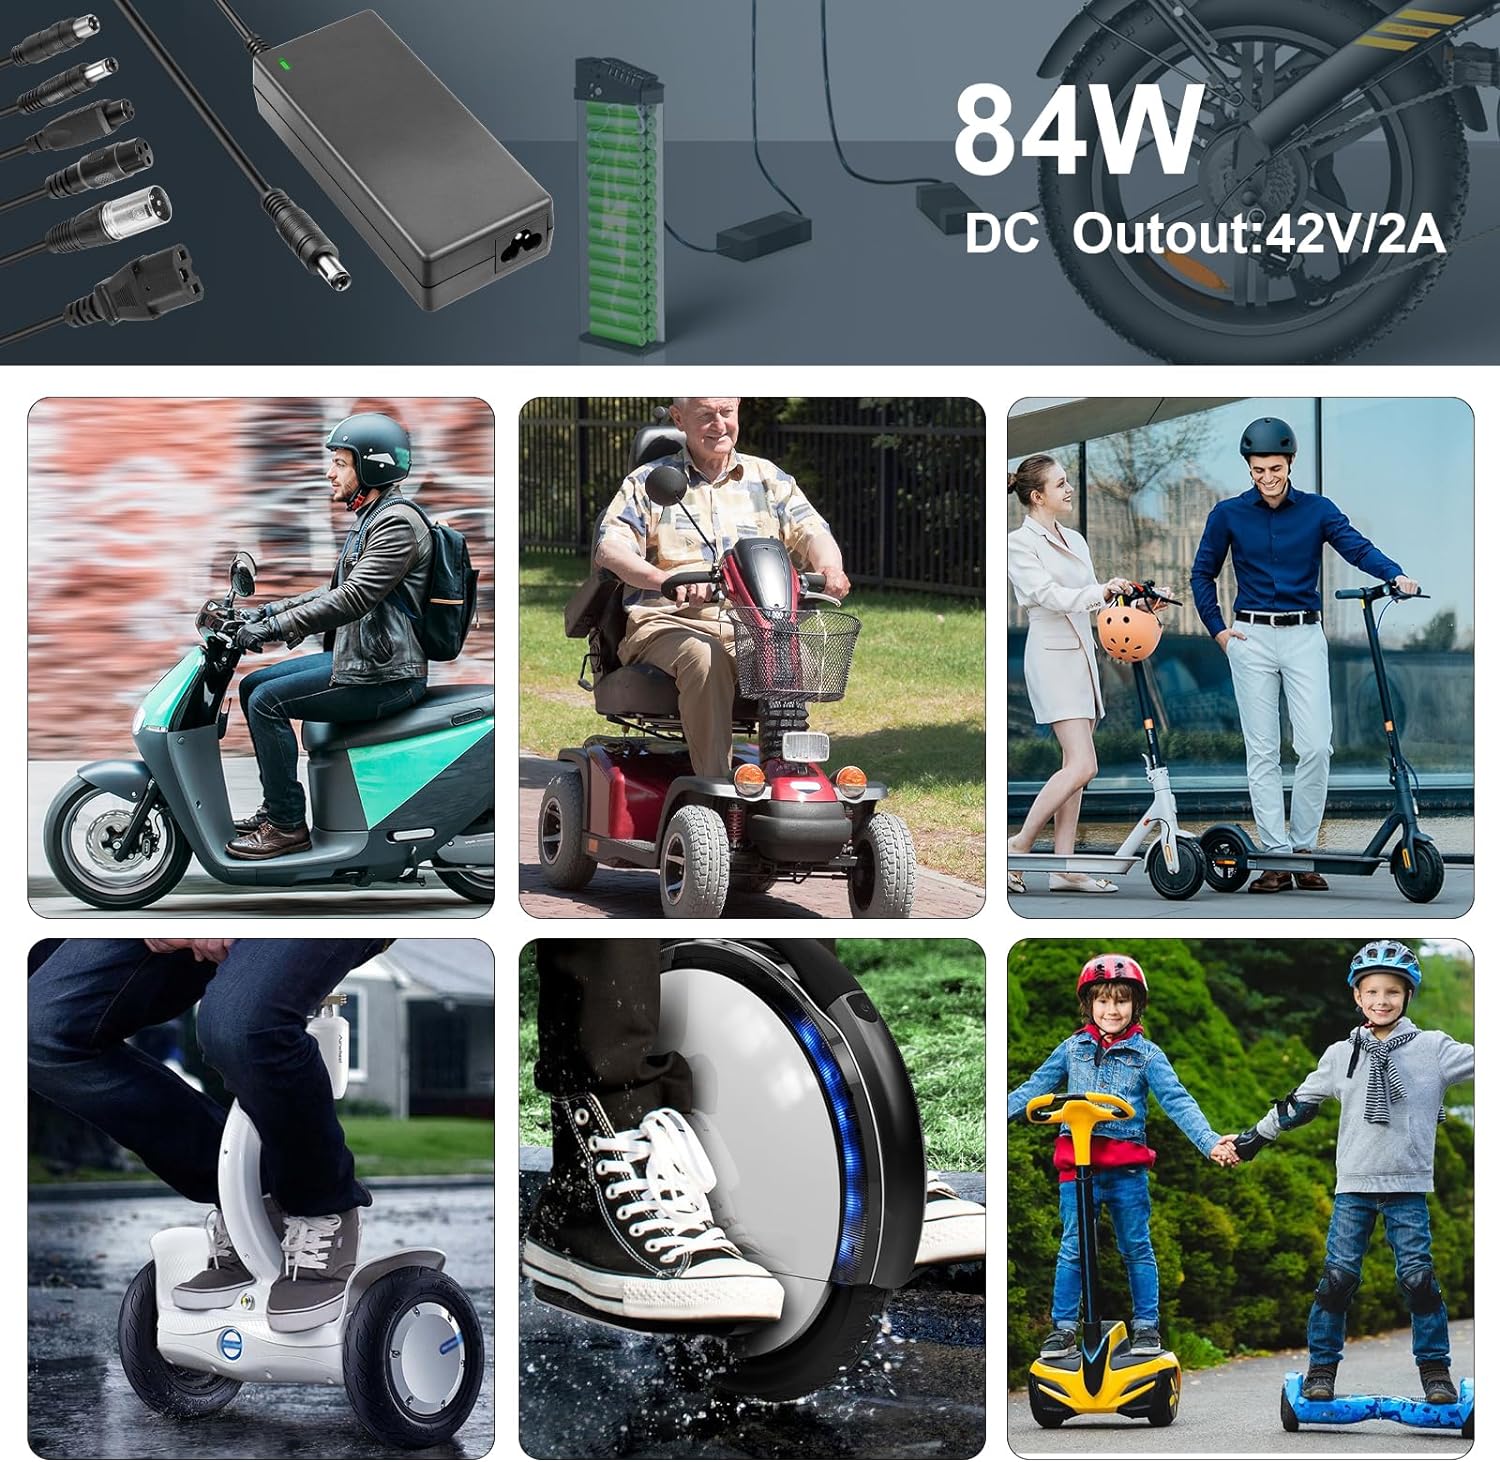 42V 2A Scooter Charger with 7 Connections, Fast Charger for Razor/Jetson/Voyage, gotrax Electric Scooter Charger, ninebo